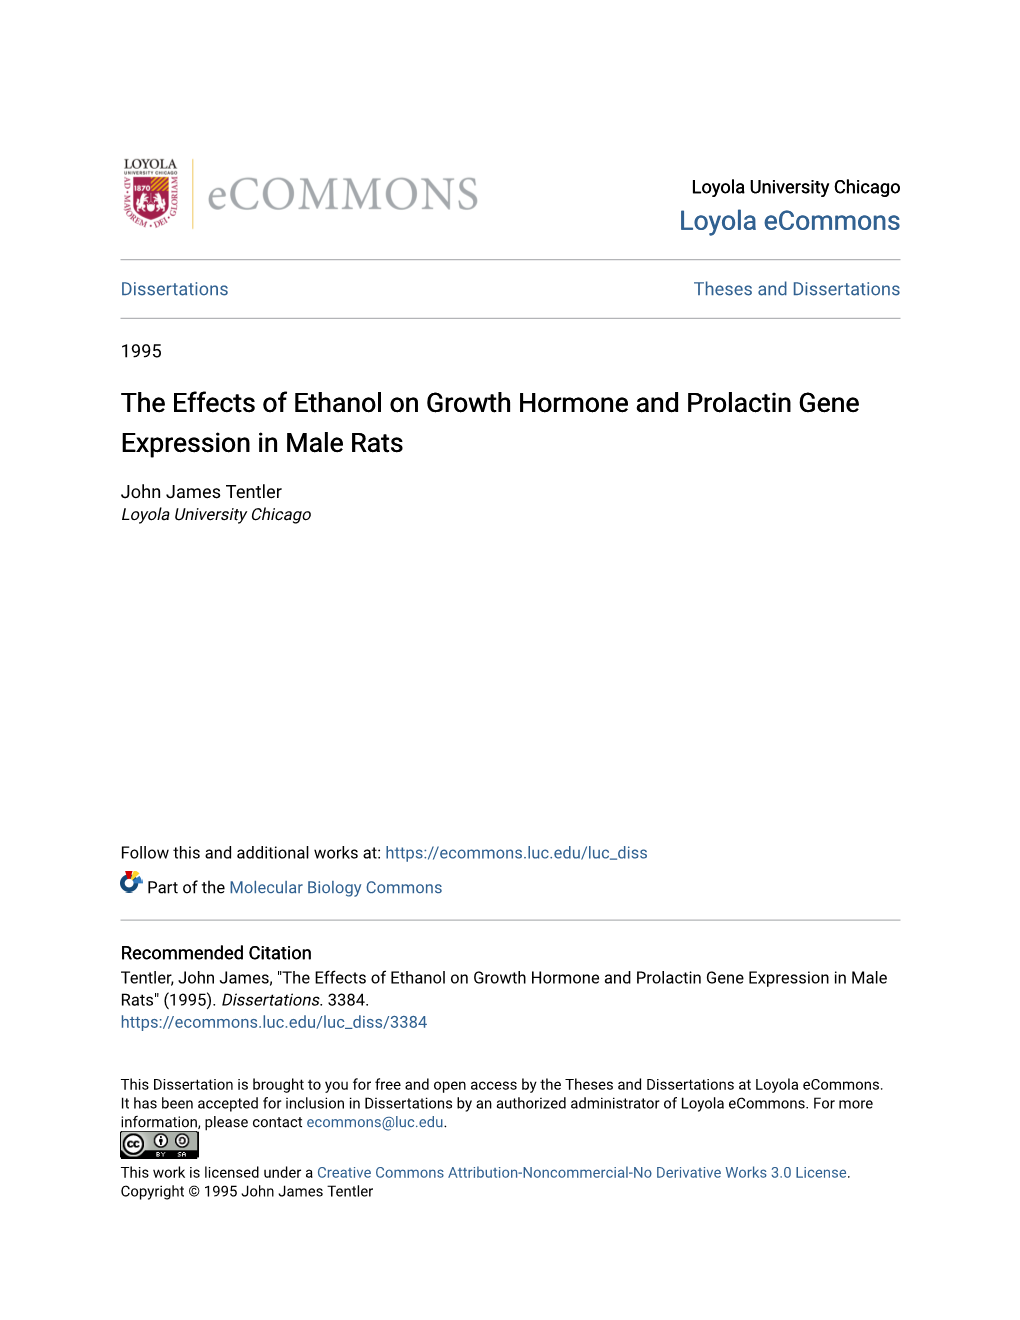 The Effects of Ethanol on Growth Hormone and Prolactin Gene Expression in Male Rats